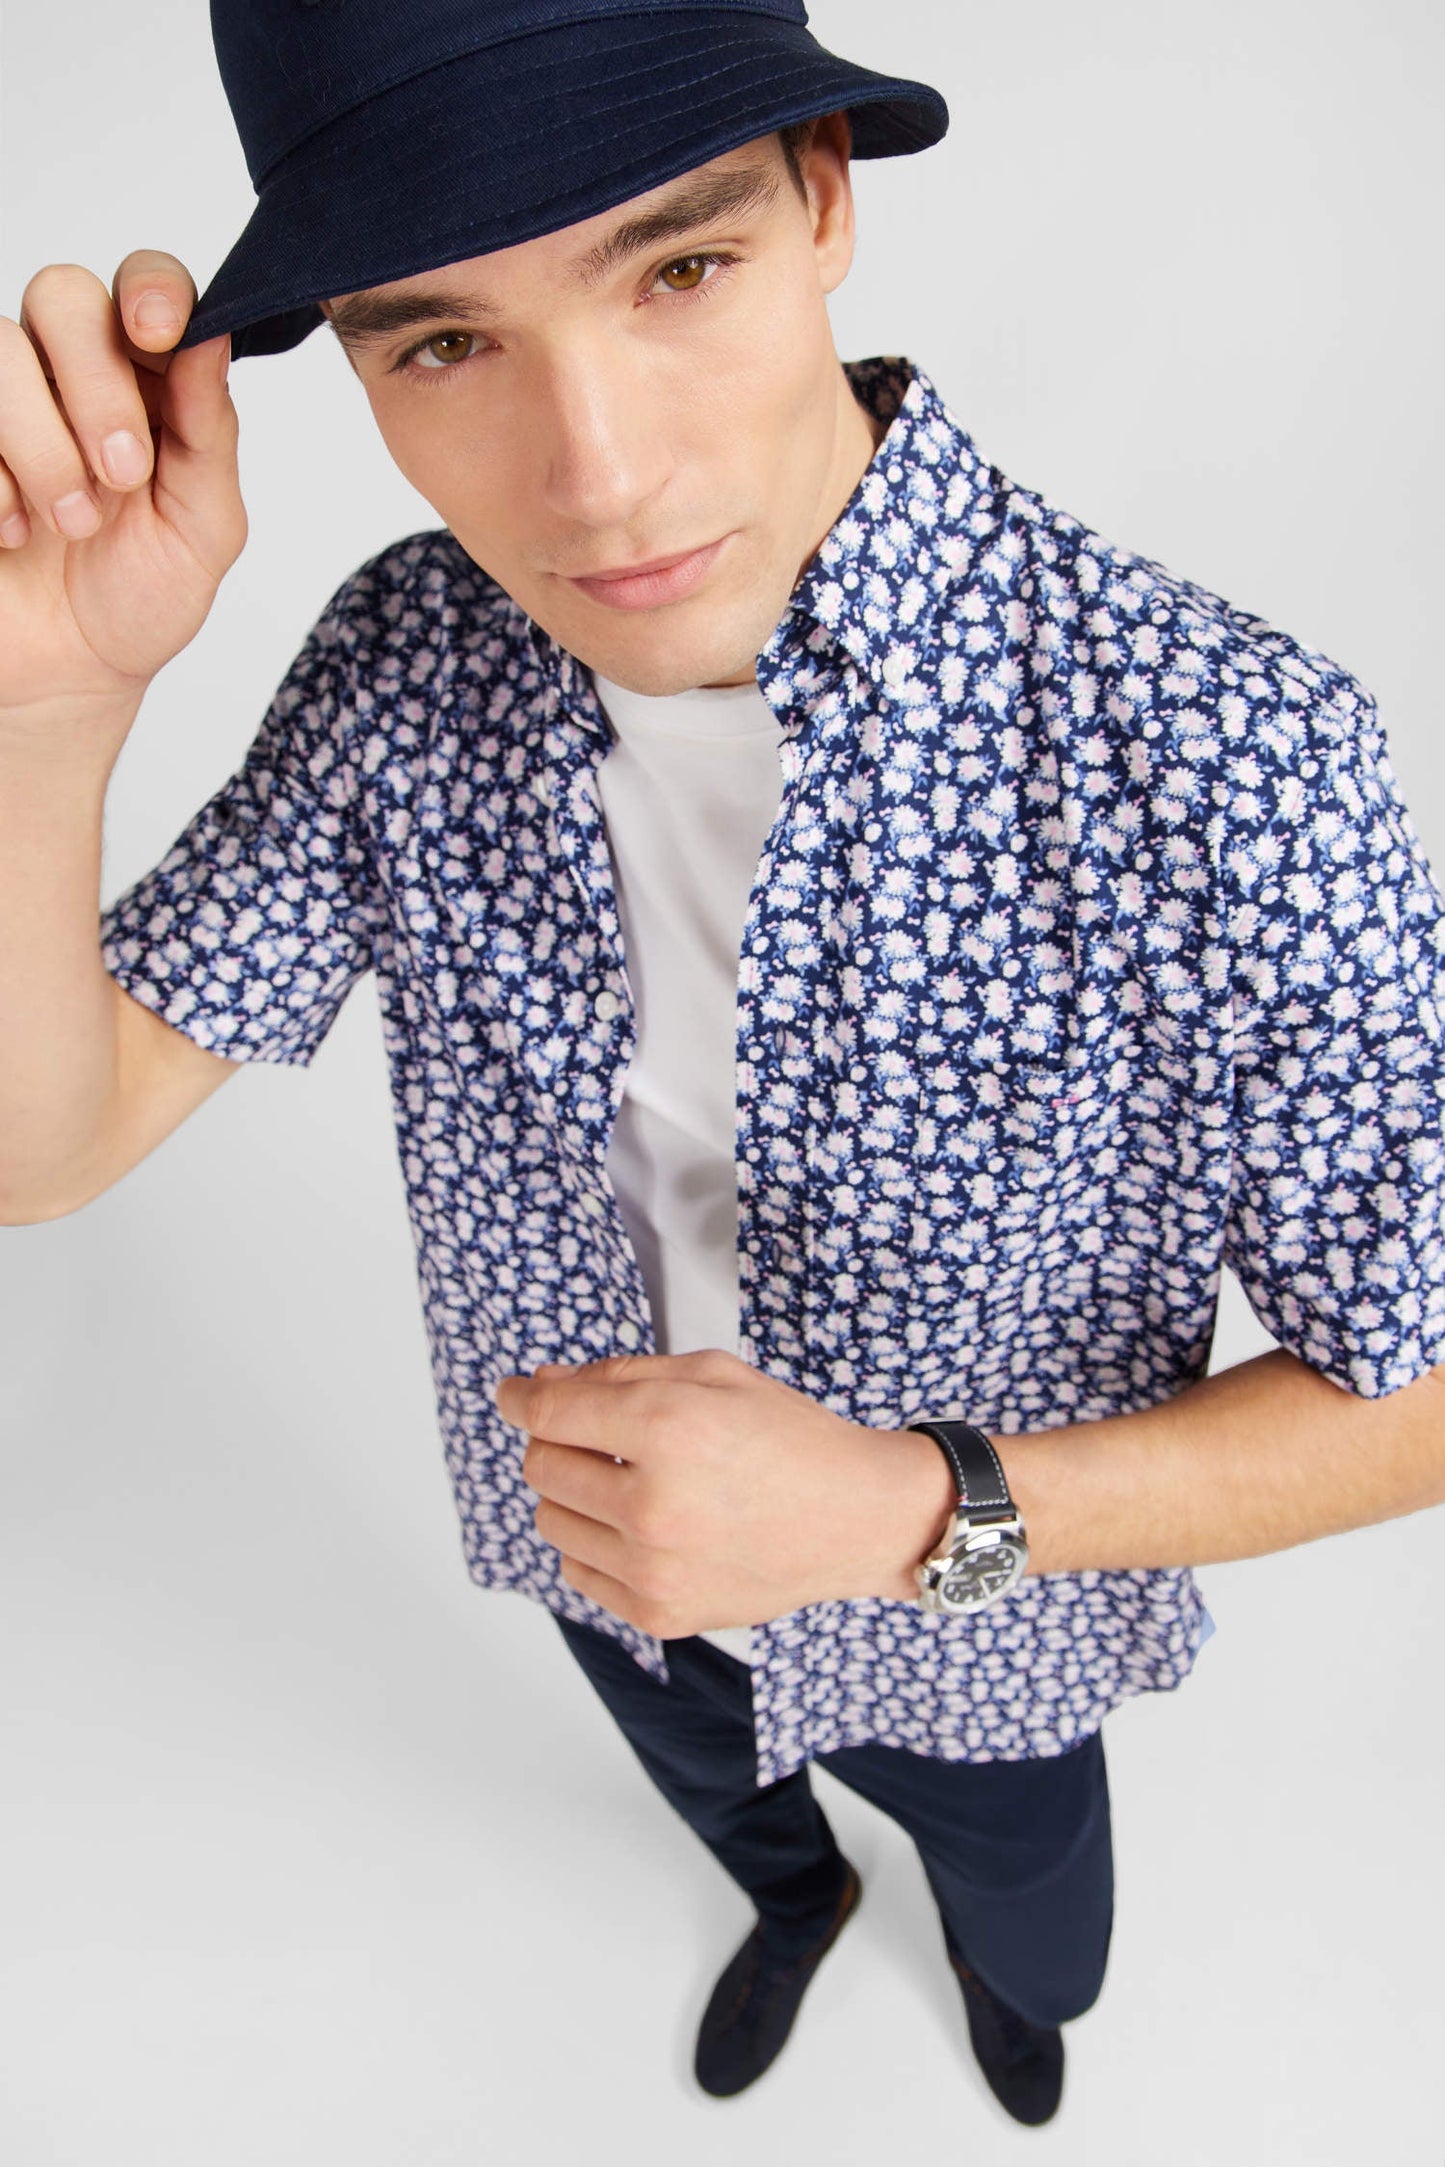 Navy blue shirt with flower print - Image 1